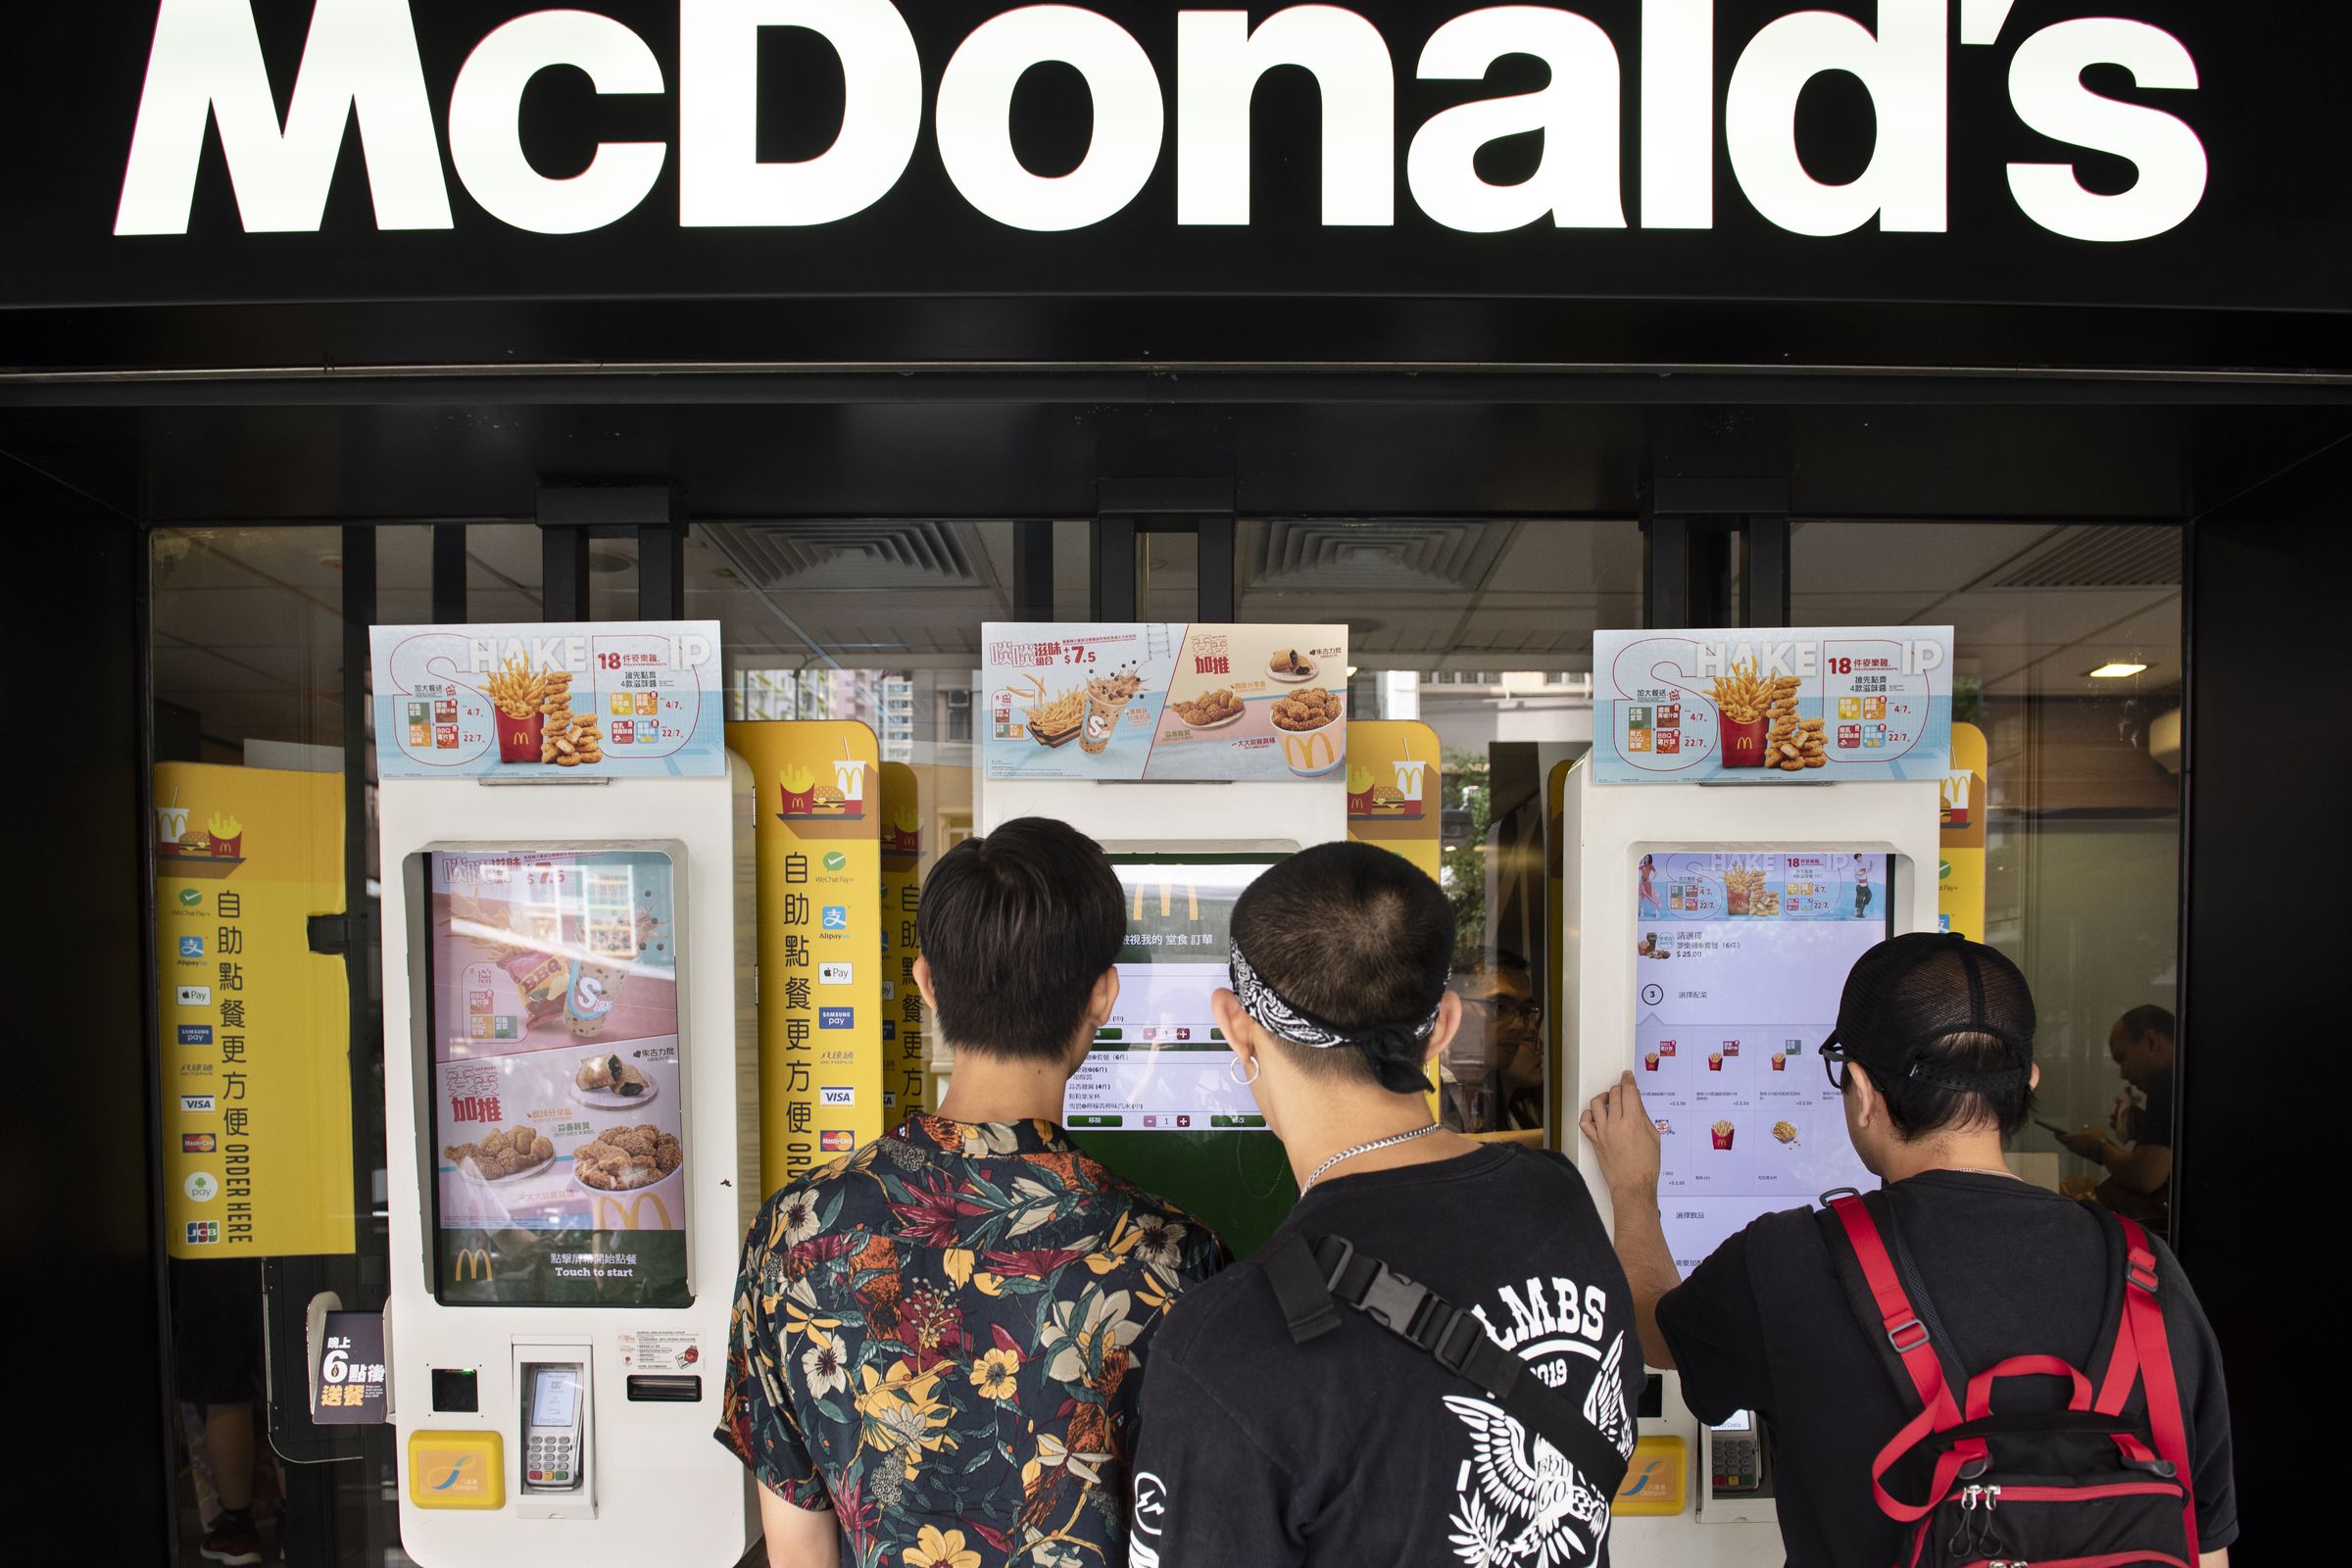 Customers order food in an automated self-ordering kiosk at...